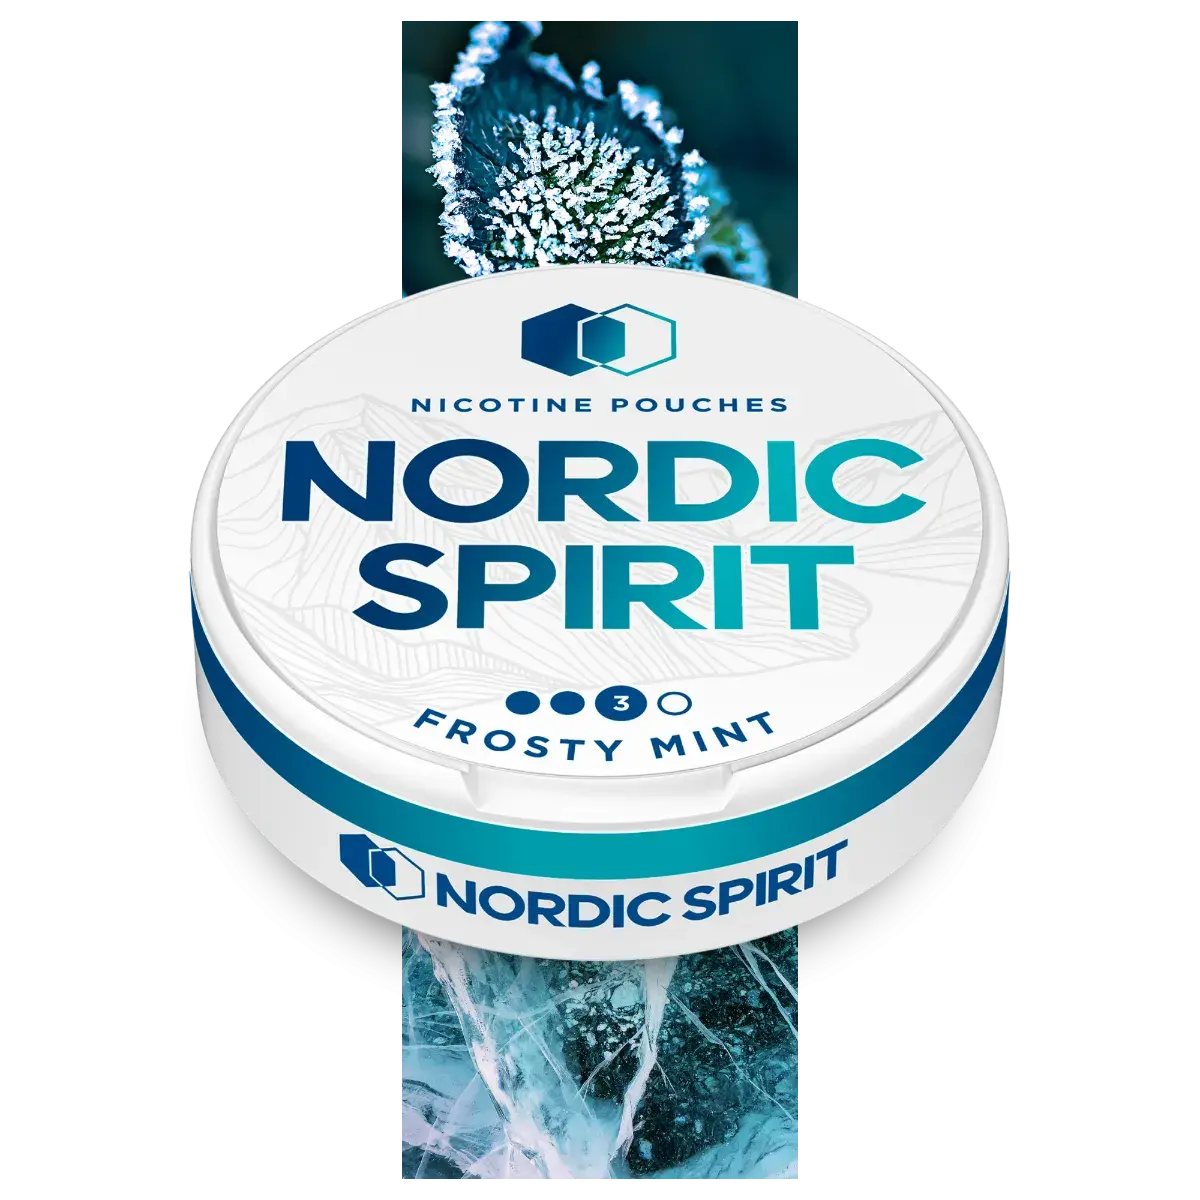 Can of Nordic Spirit Frosty Mint Nicotine pouches in a strong strength, it's opened showing that the can contains nicotine pouches, is made of recyclable material and has a storage try for used pouches.